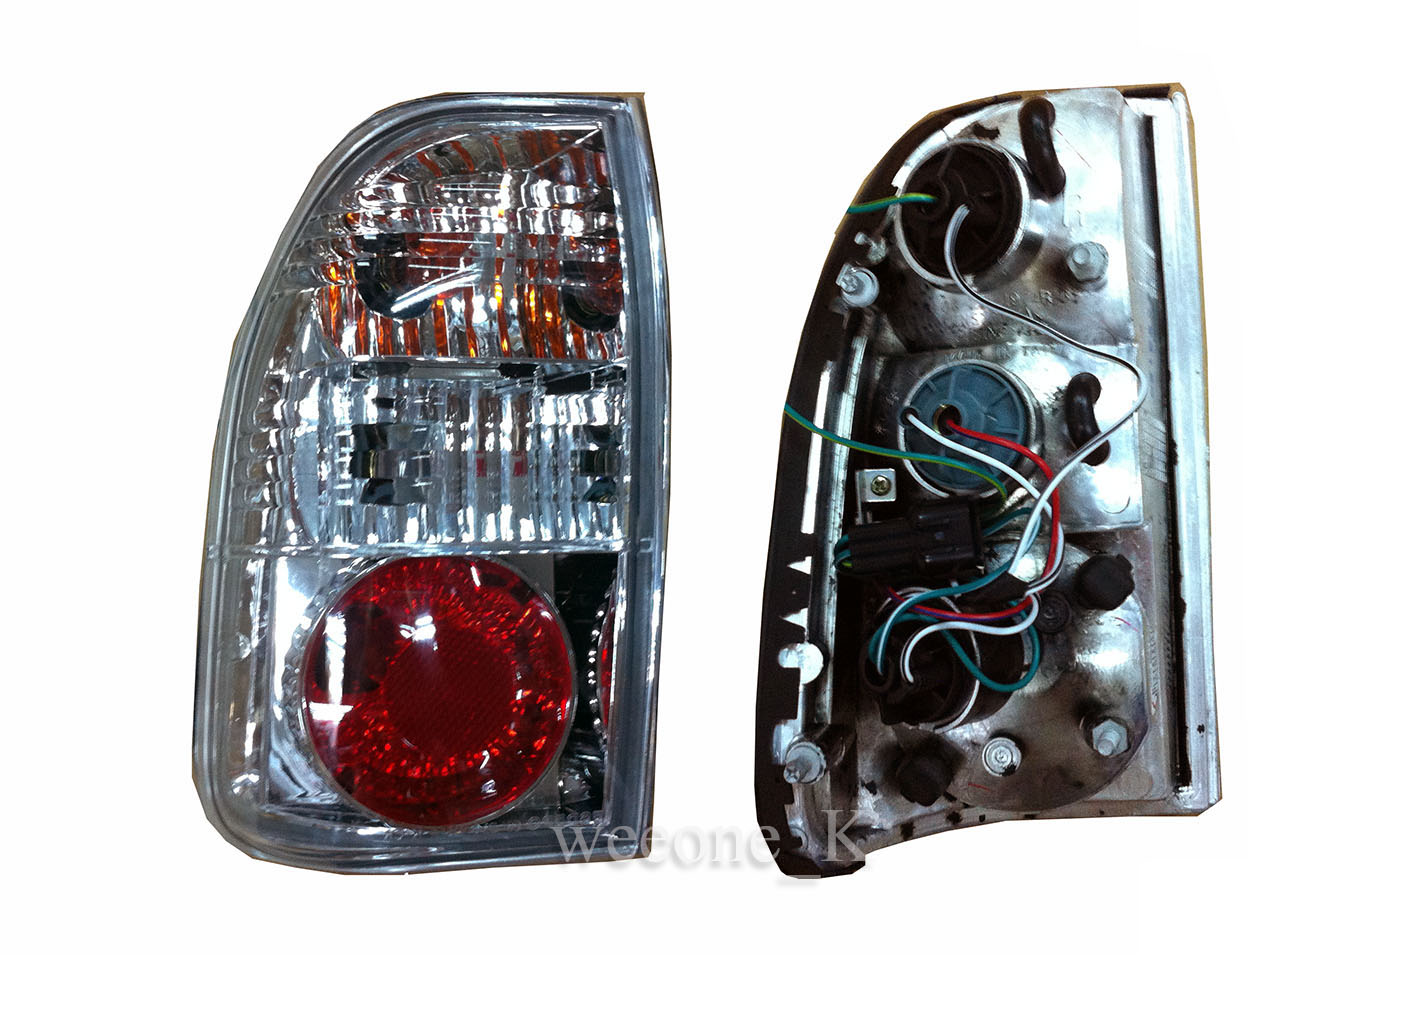 K1AutoParts Crystal Donut Rear Taillights Tail Light Lamps For Mitsubishi L200 Animal Warrior Strada 1995-2005 